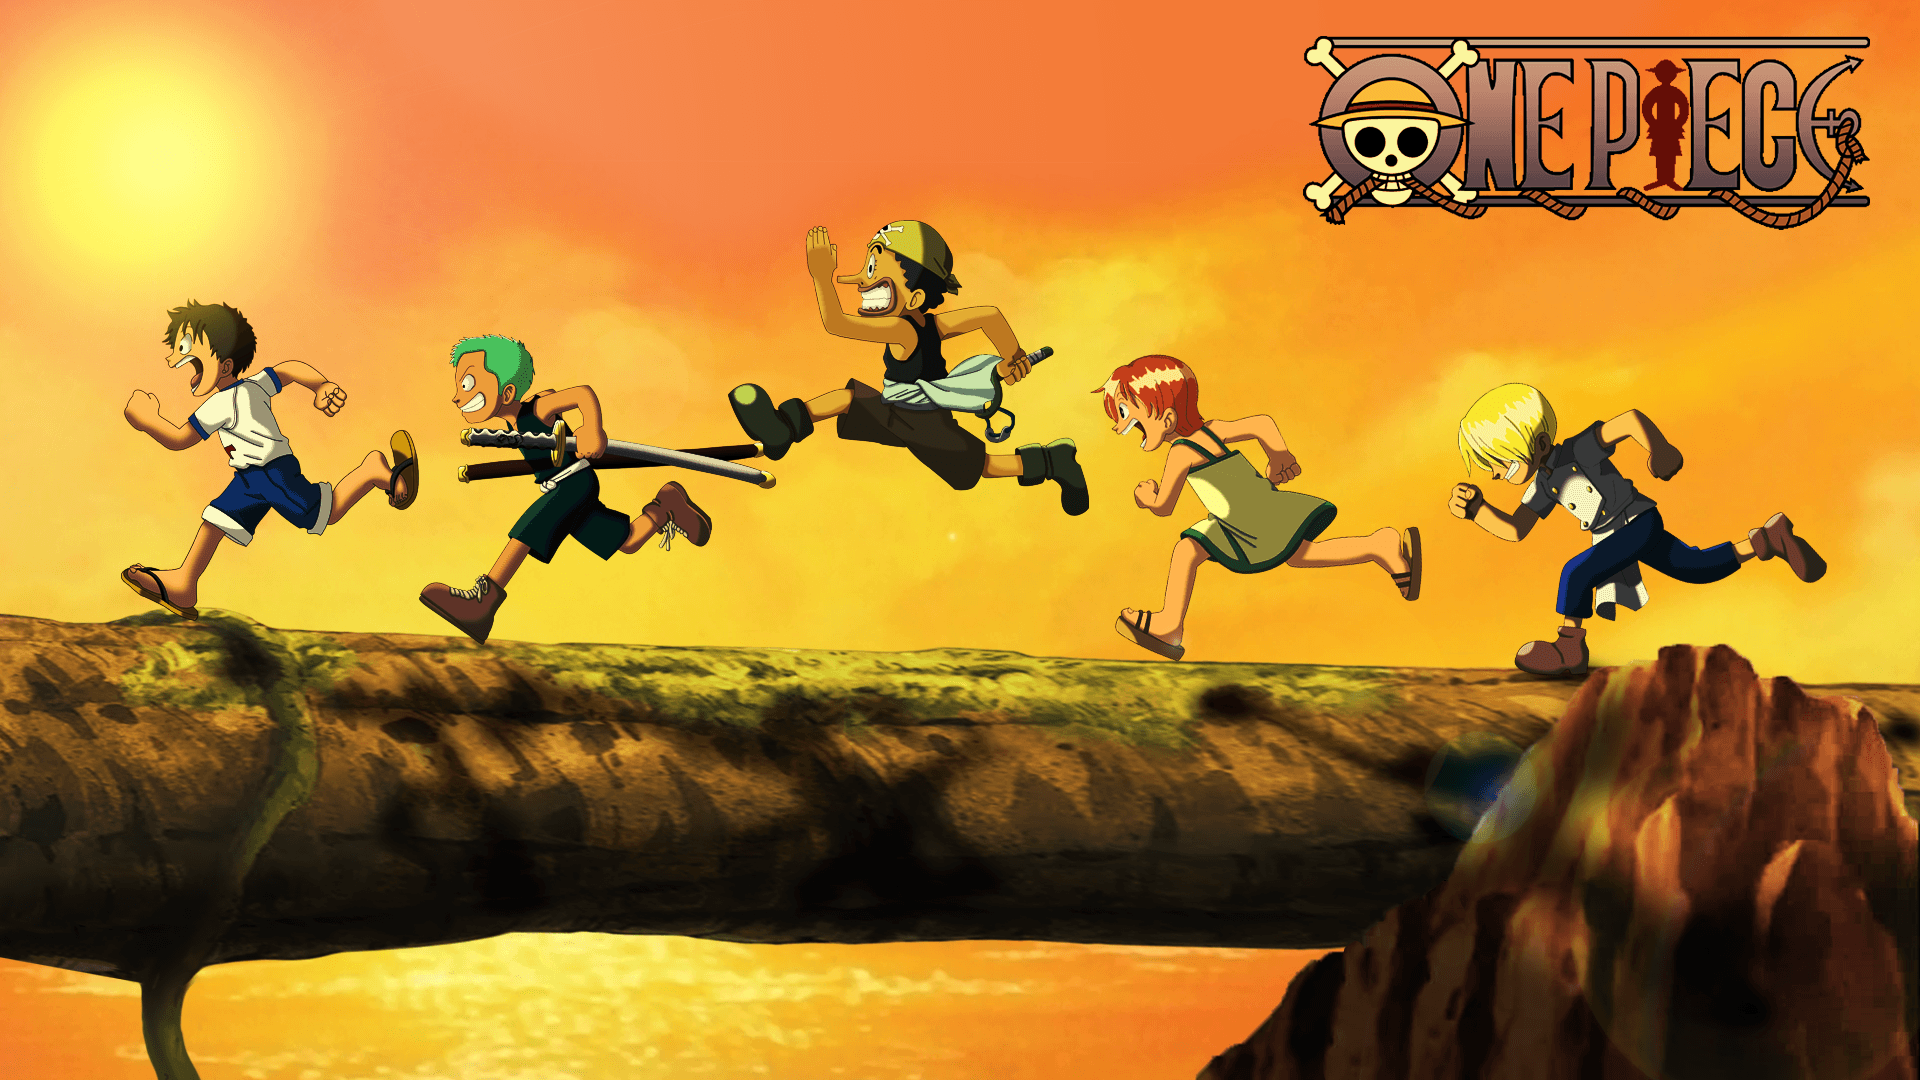 Free Download One Piece 1080p Anime Wallpaper Piece 1080p